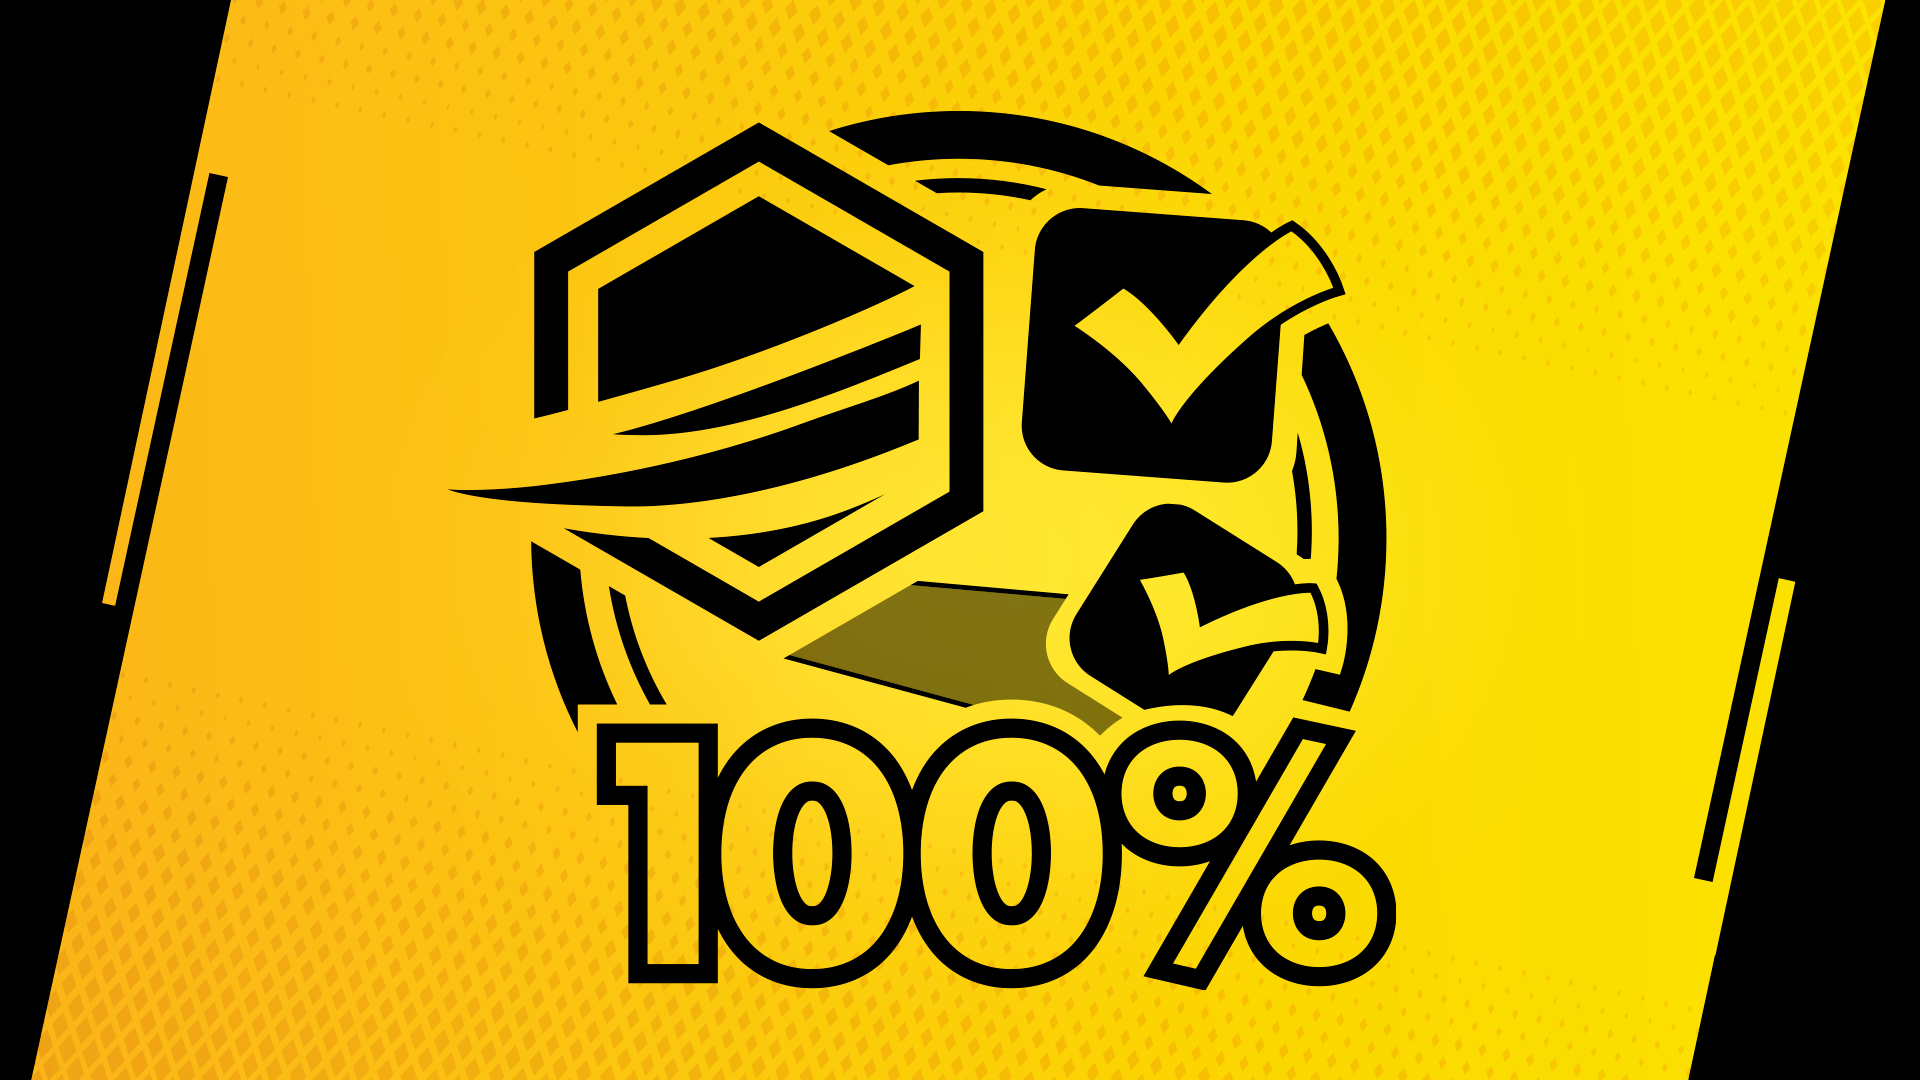 Icon for Max Power